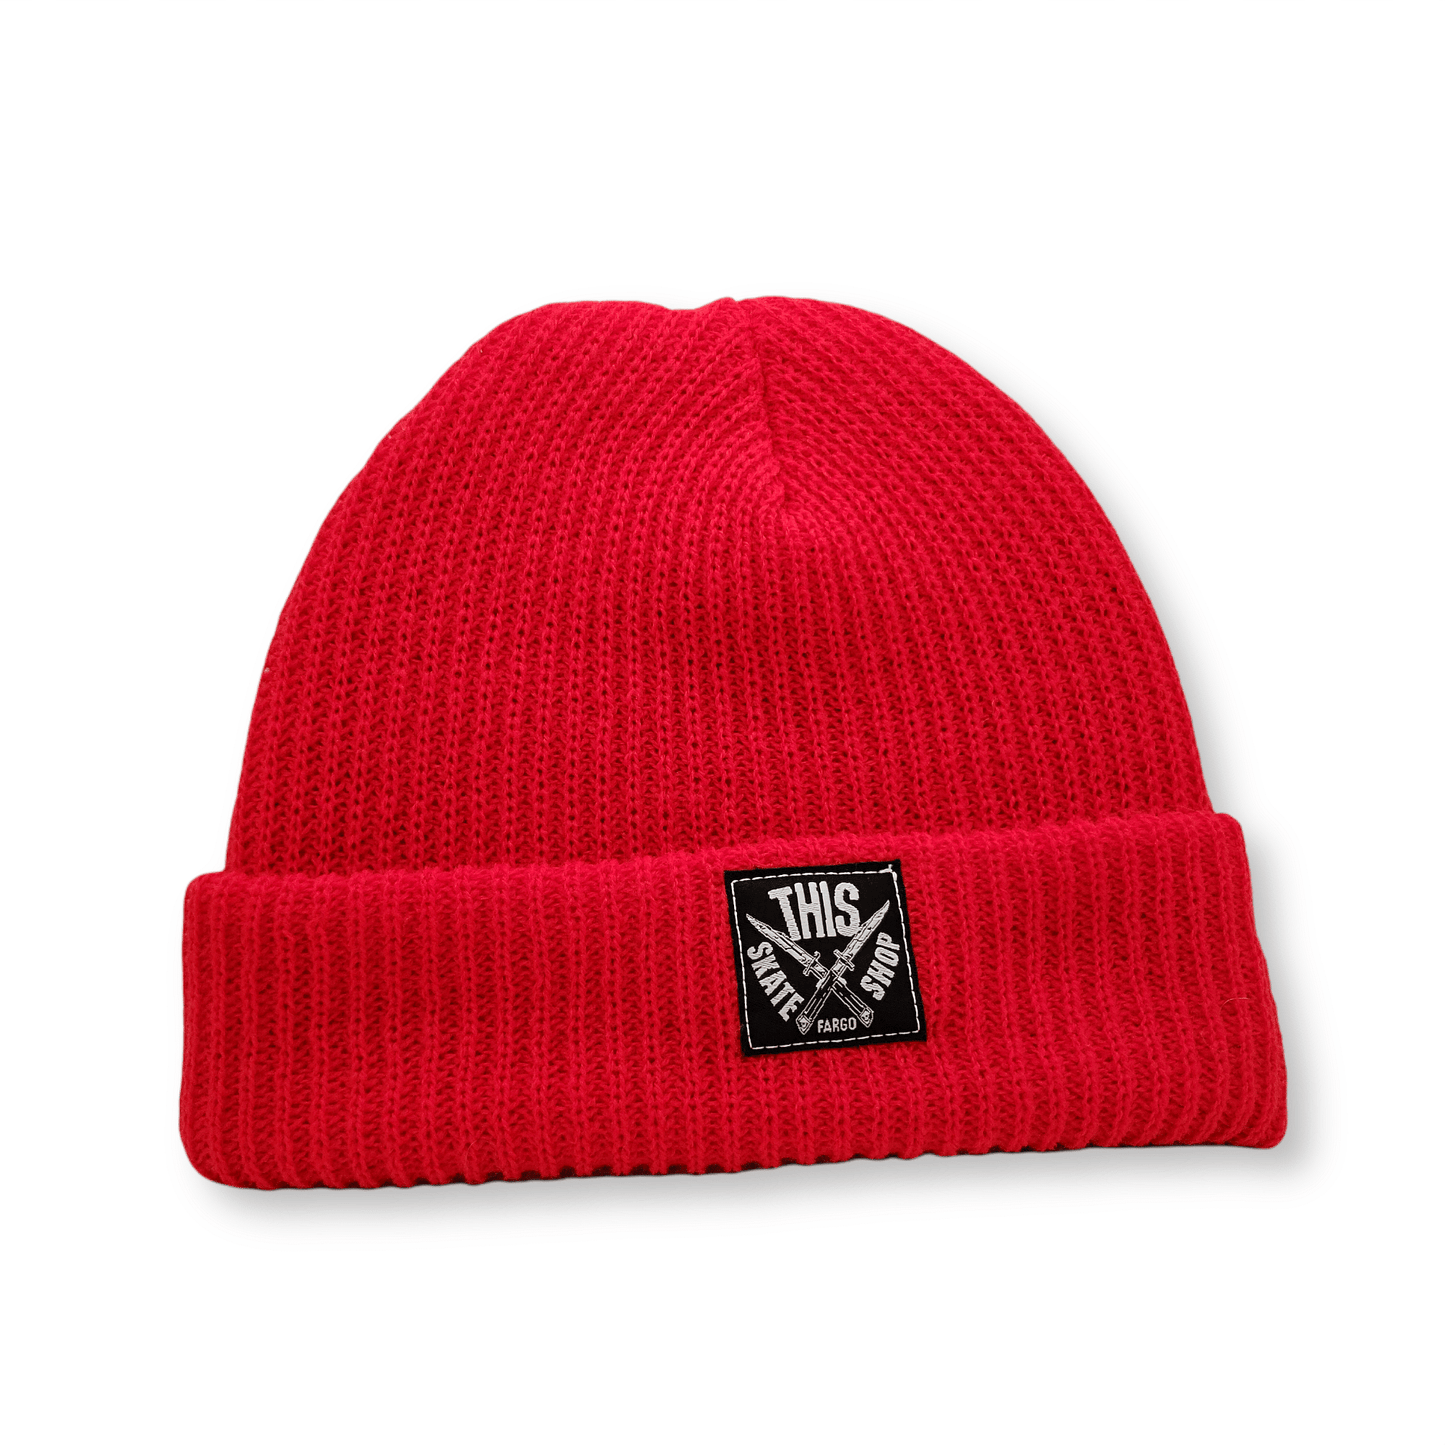 THIS Skateshop | Knit Beanie - Red/Black Patch